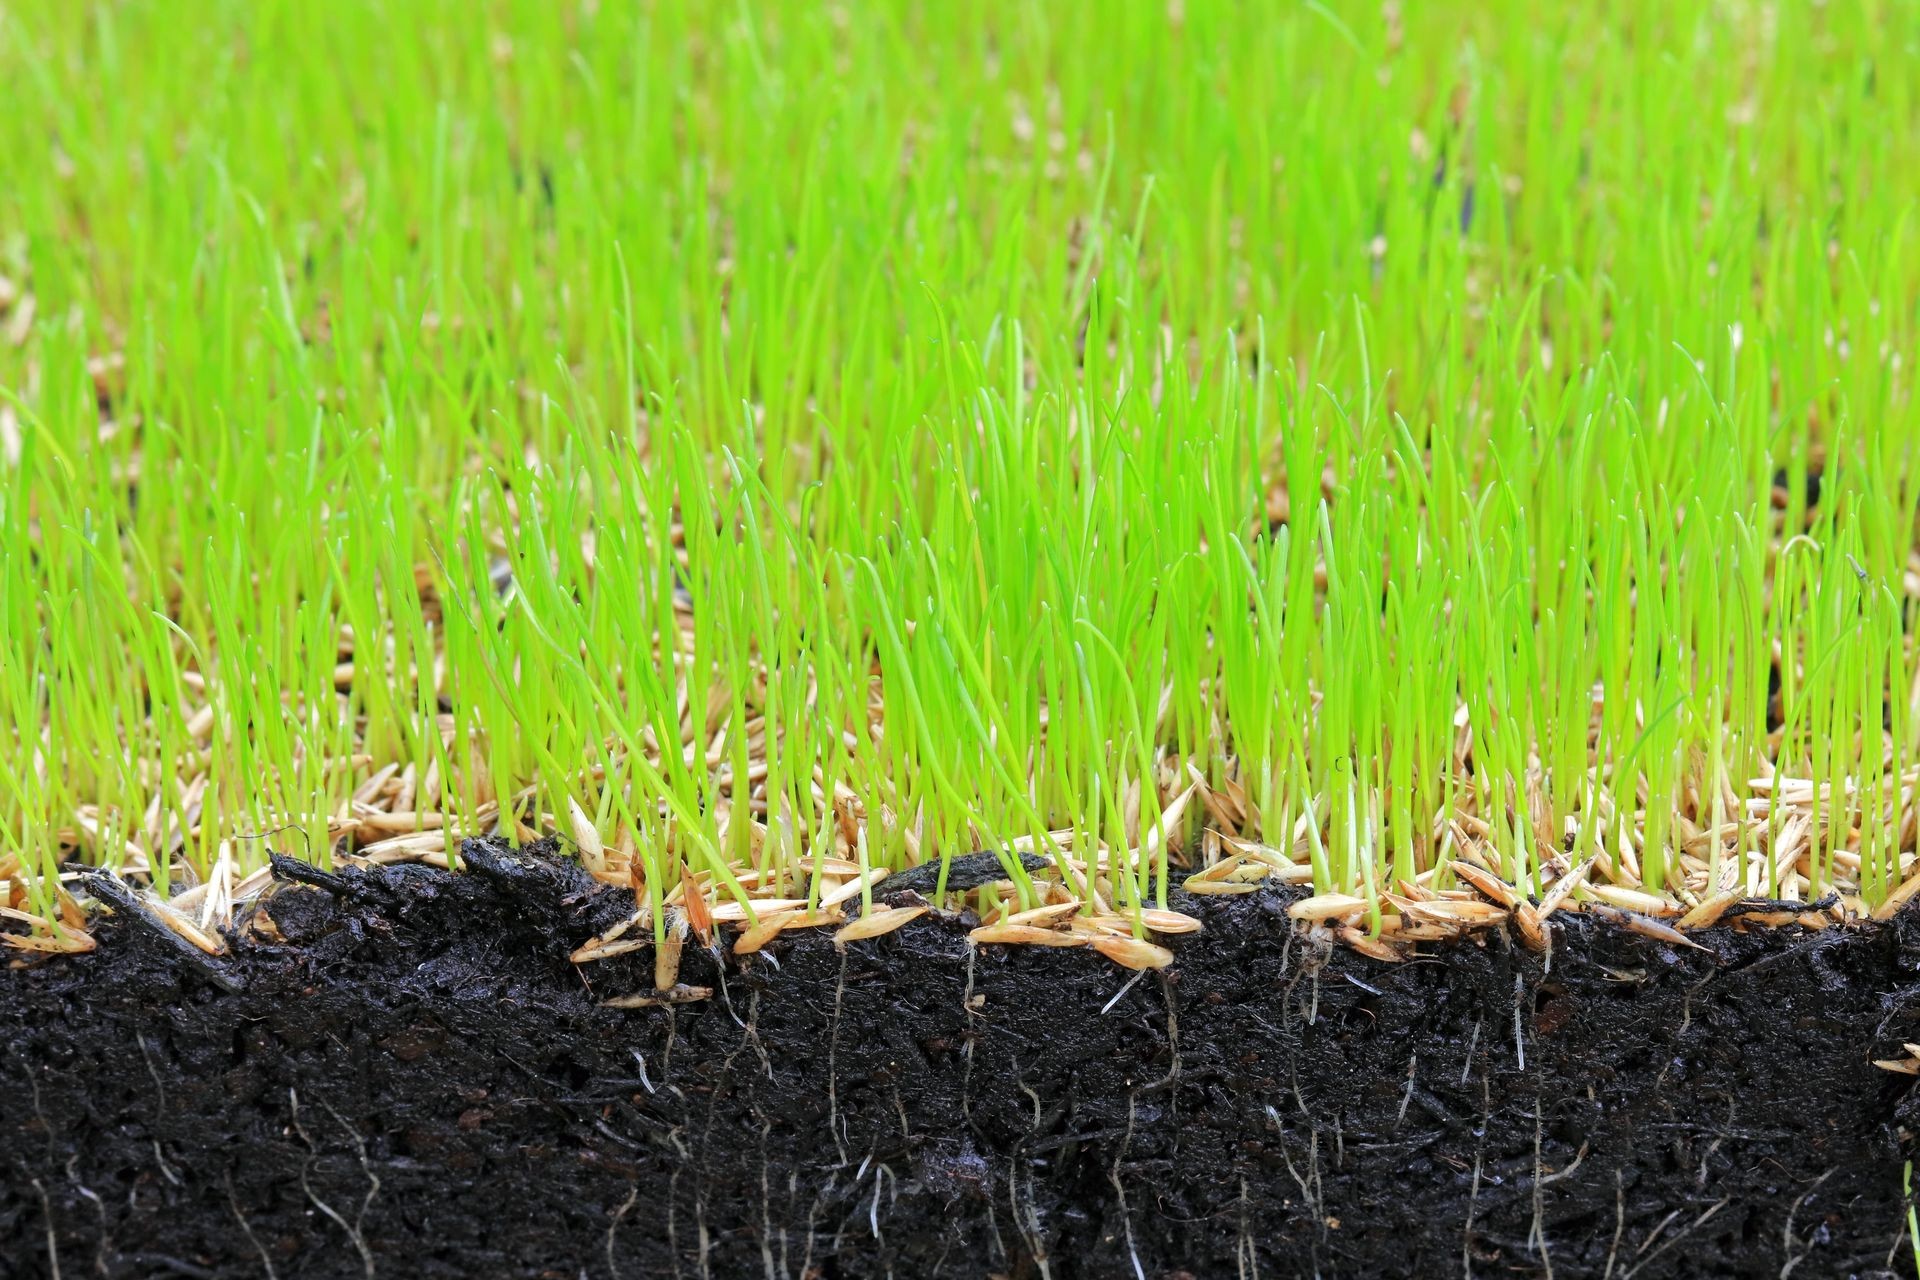 Close Up Of Grass Seeds Germinating In Soil. New Growth Of A Lawn Showing Roots Below The Earth Surface And Fresh Grass Above.